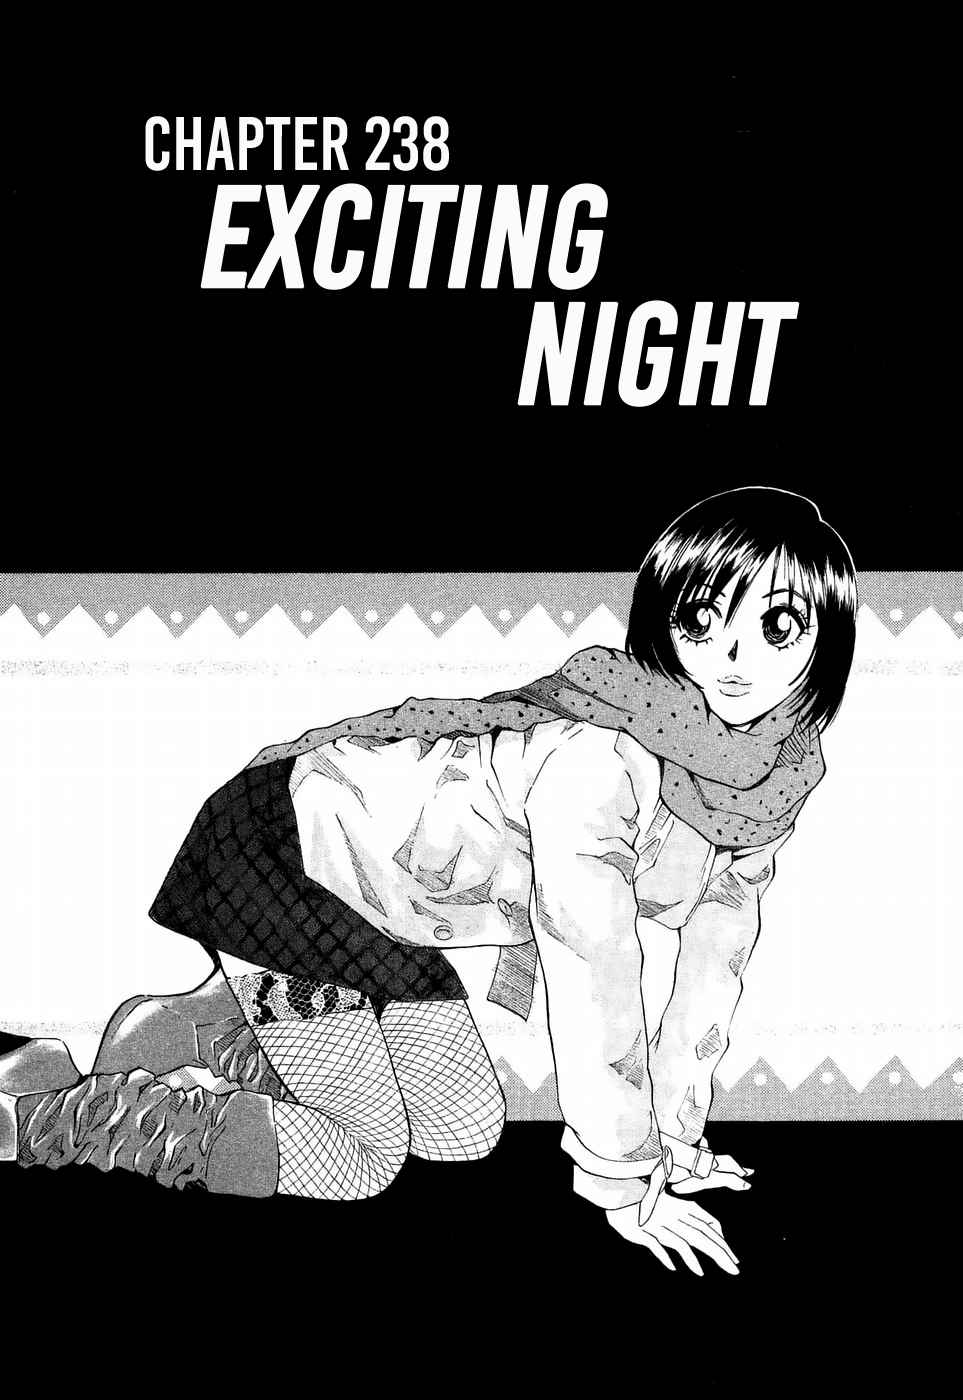 Over Rev! Vol. 21 Ch. 238 Exciting Night